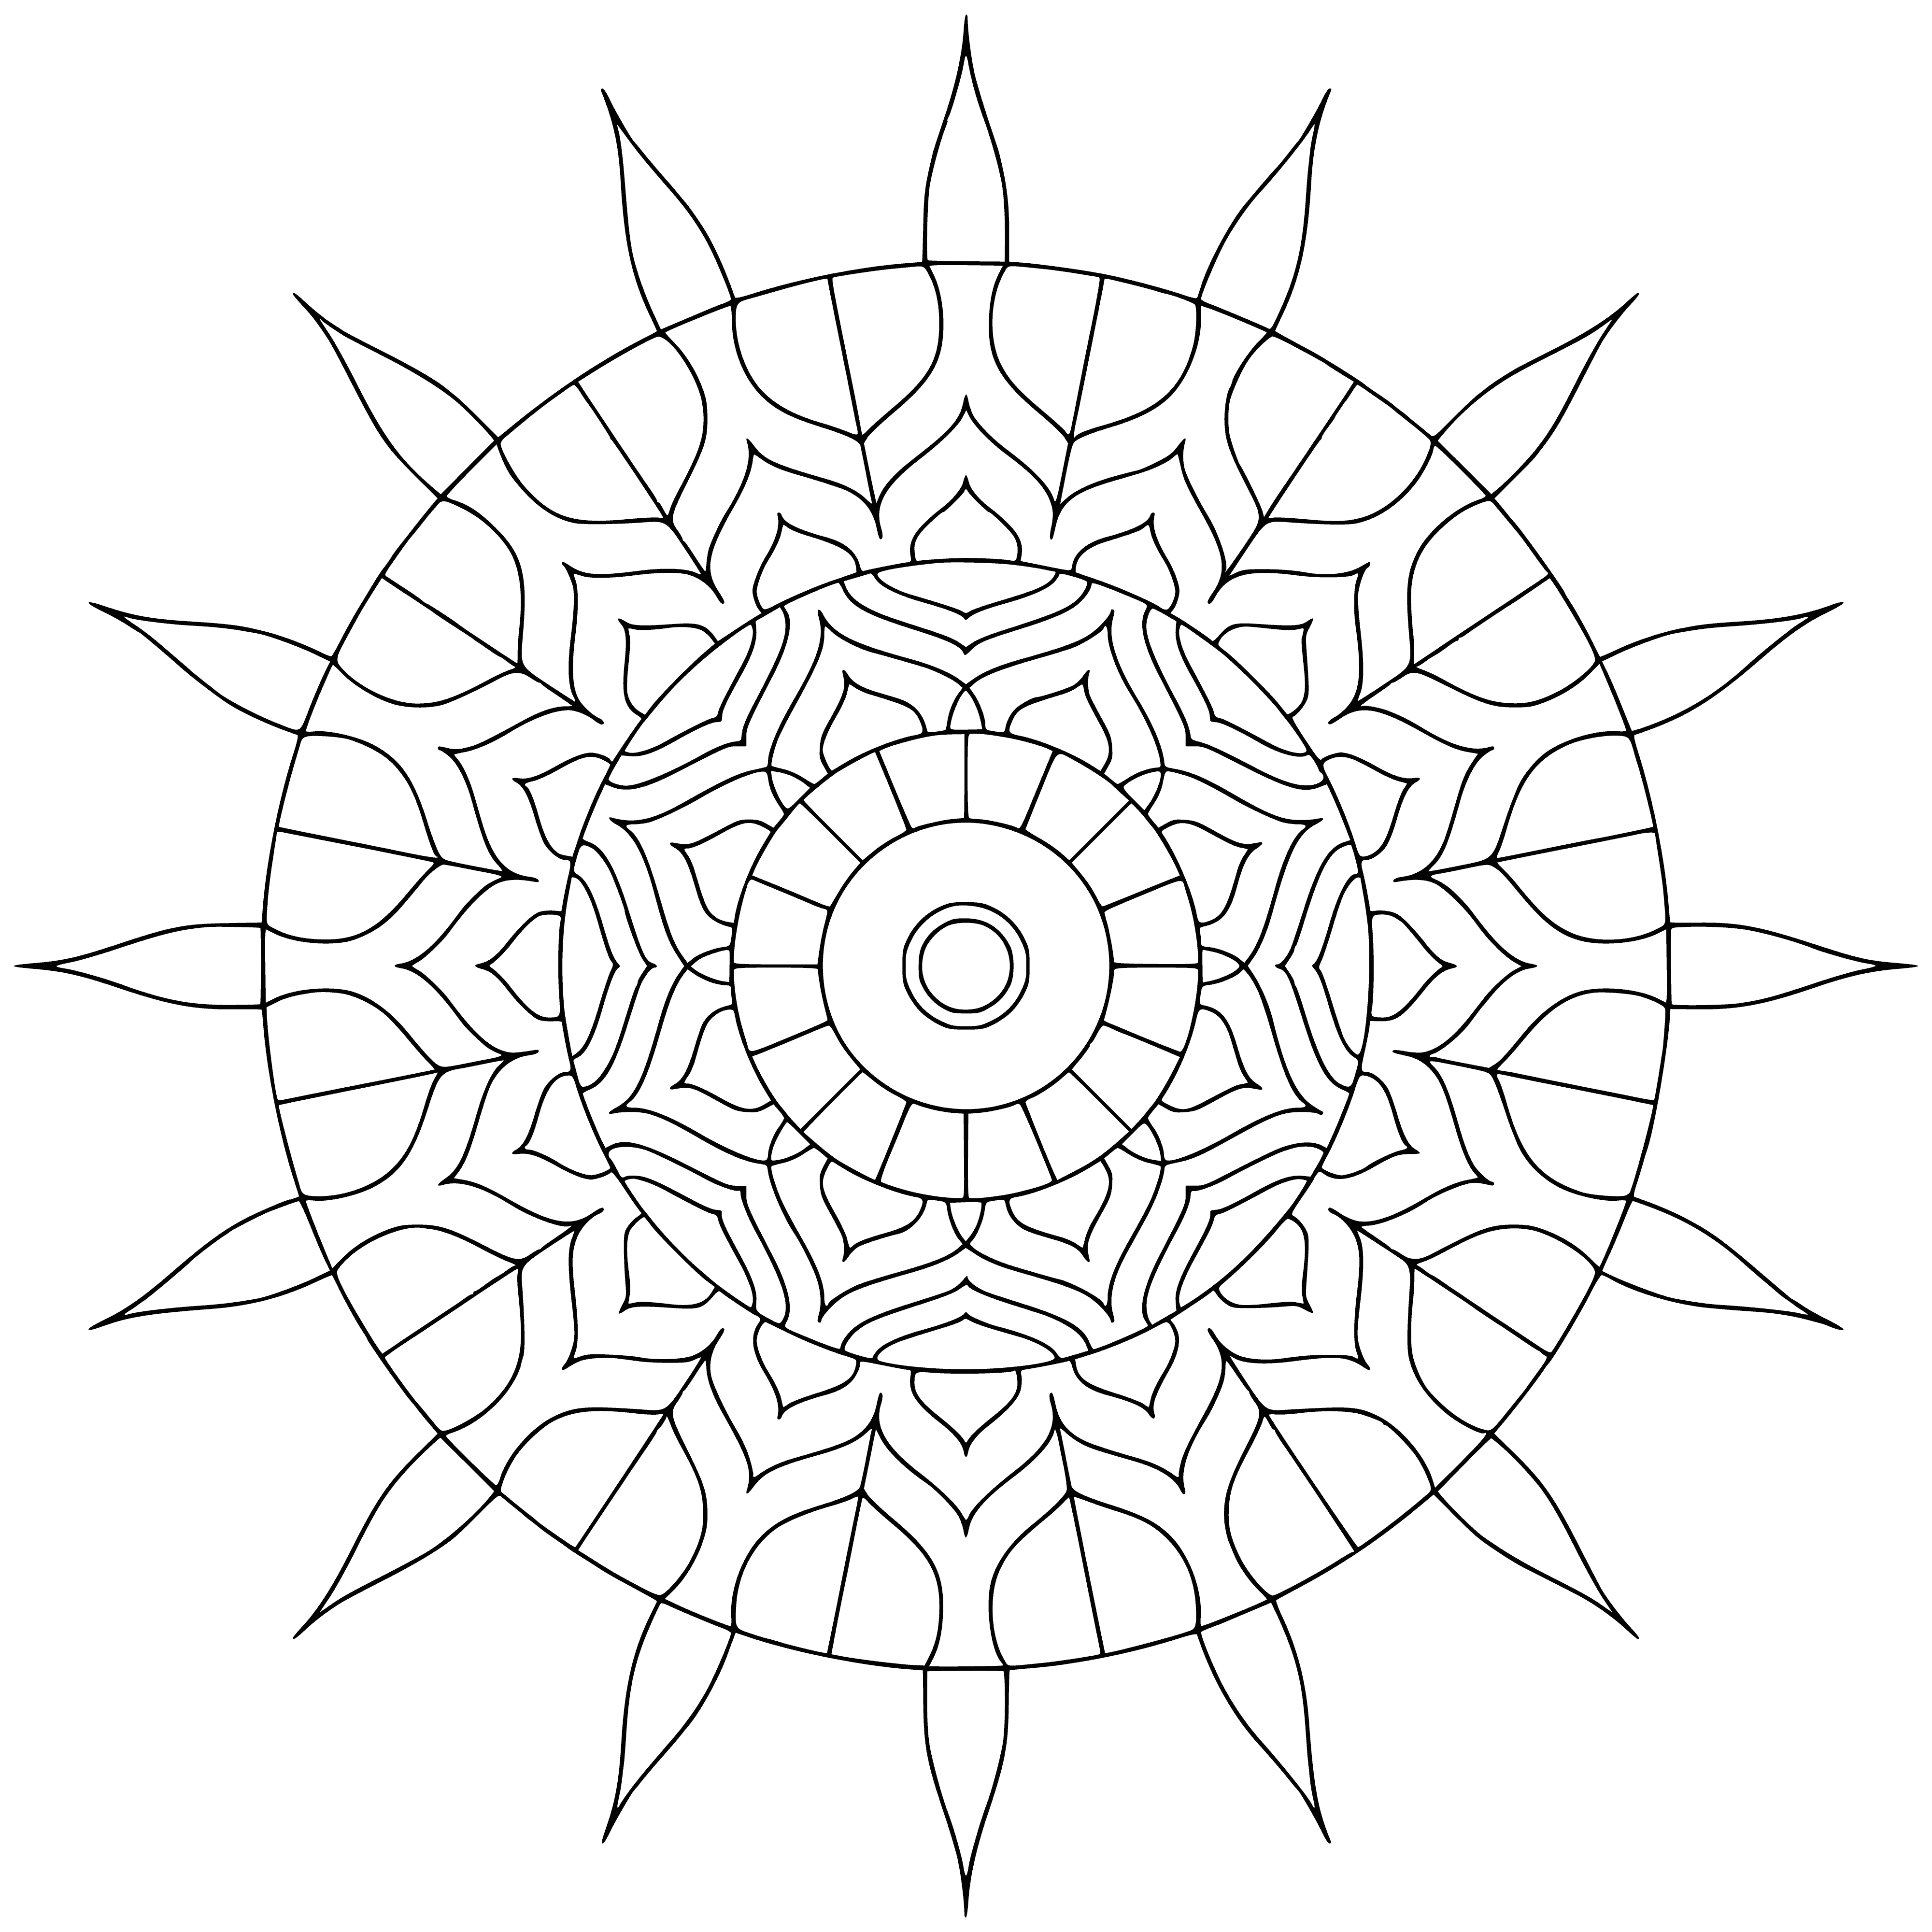 coloring page: This coloring page features a variety of mandalas in different colors and patterns. Some have shapes, some are just patterns. #art #coloring